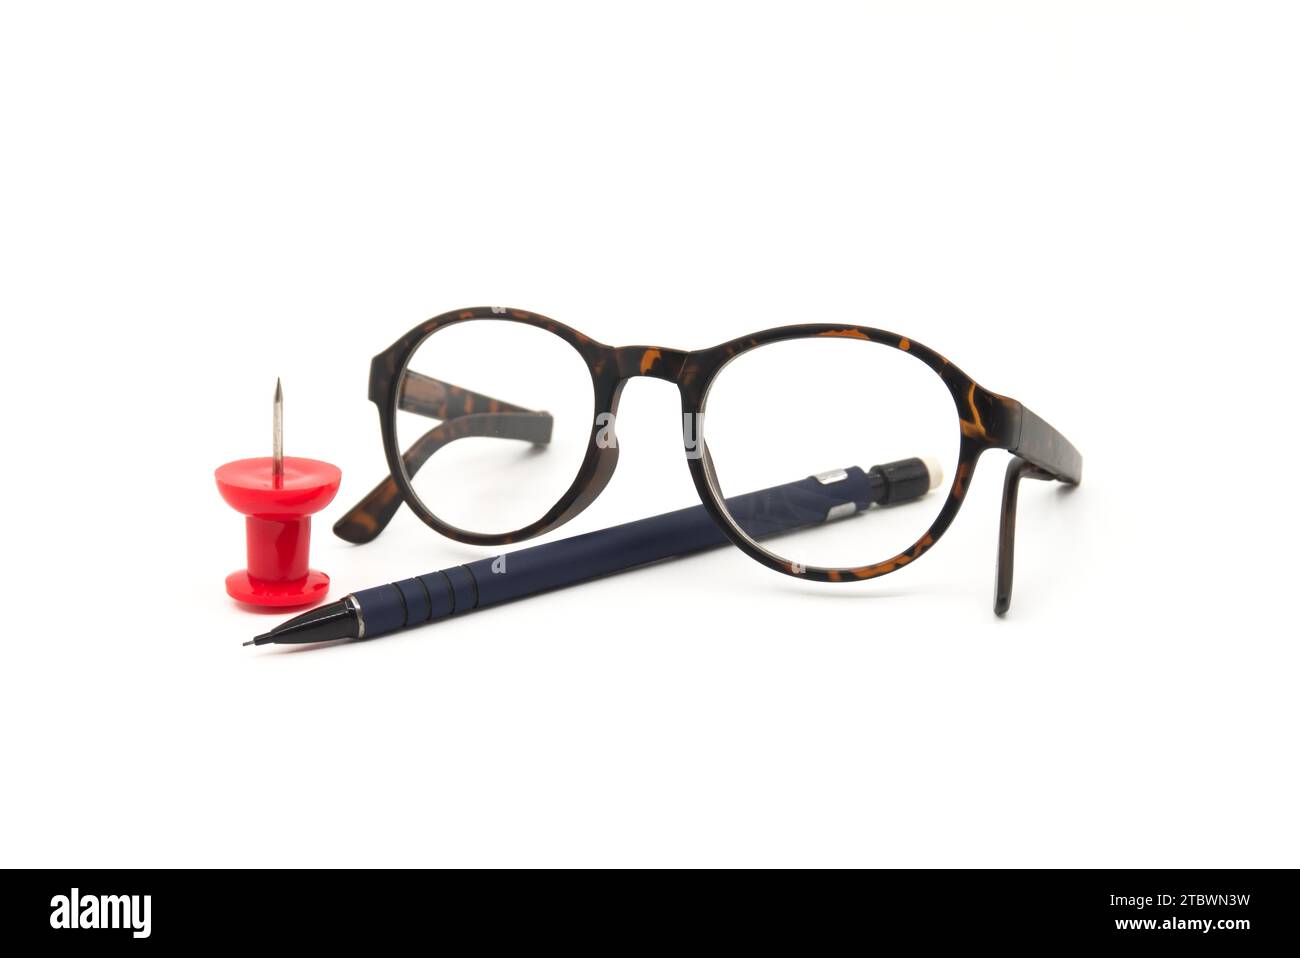 Reading glasses with tortoiseshell frames, pen and colorful red thumb tack over a white background with copy space in a business still life Stock Photo